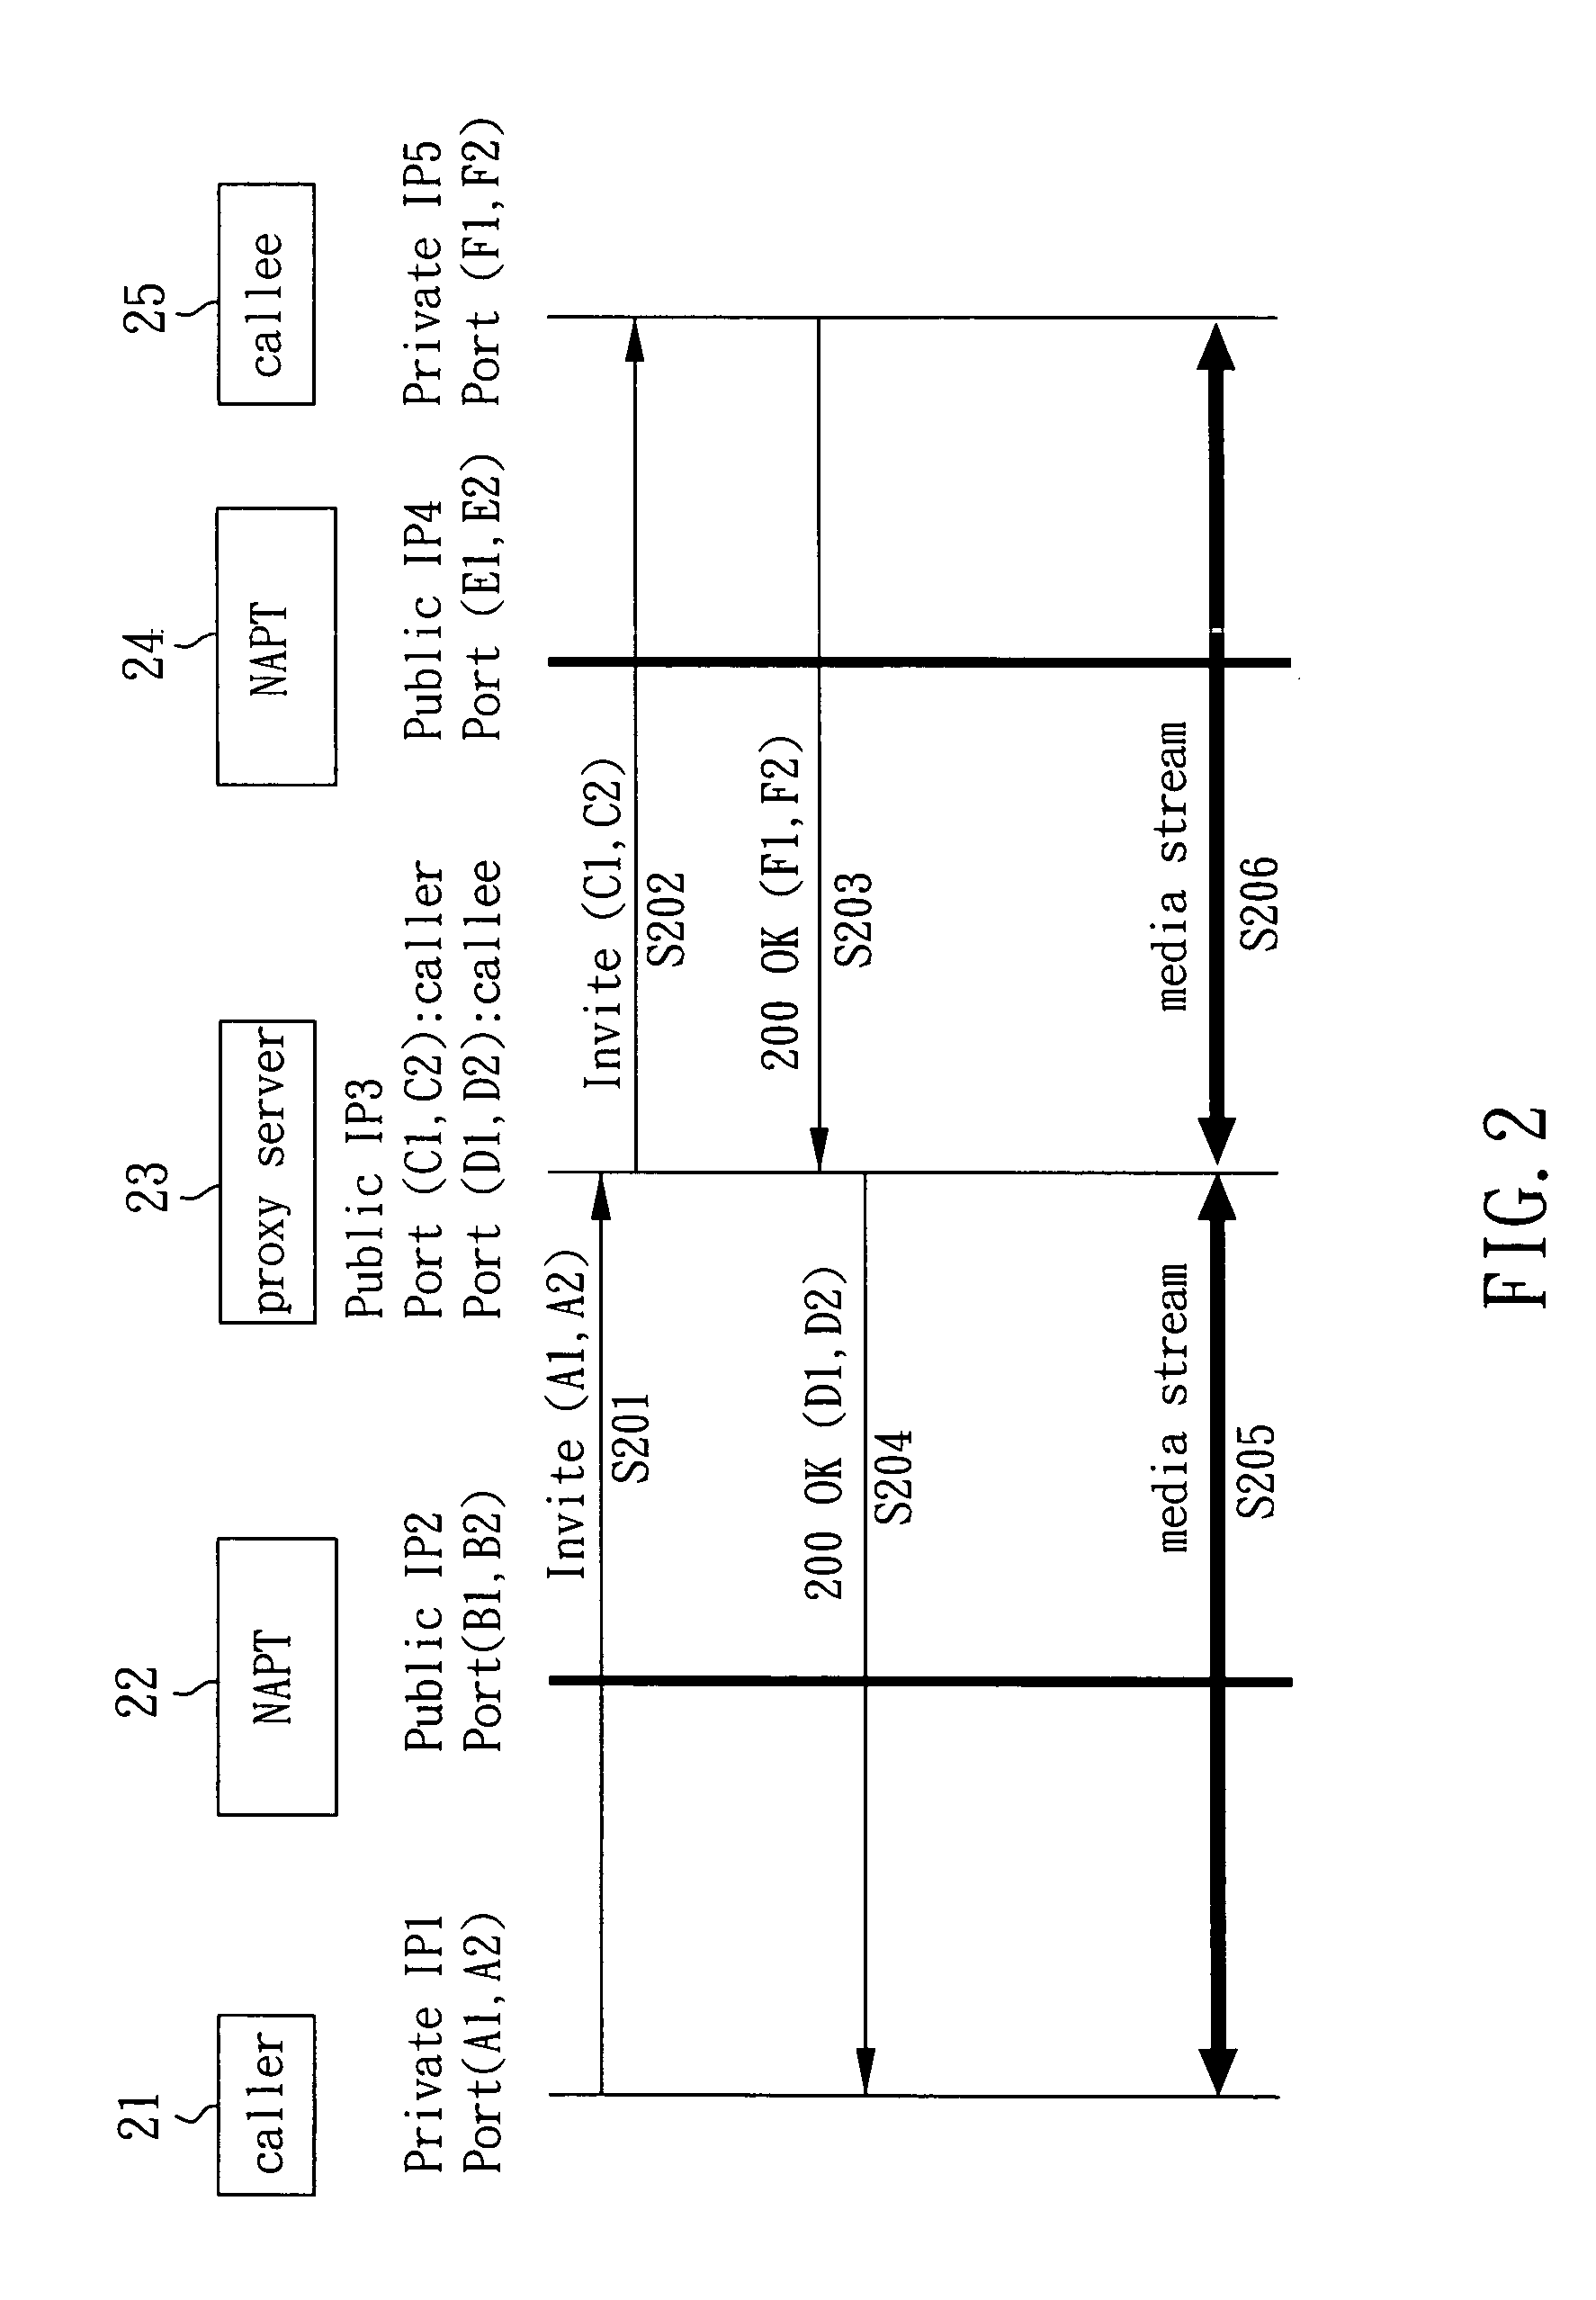 Method of reducing media relay of a network address translation apparatus